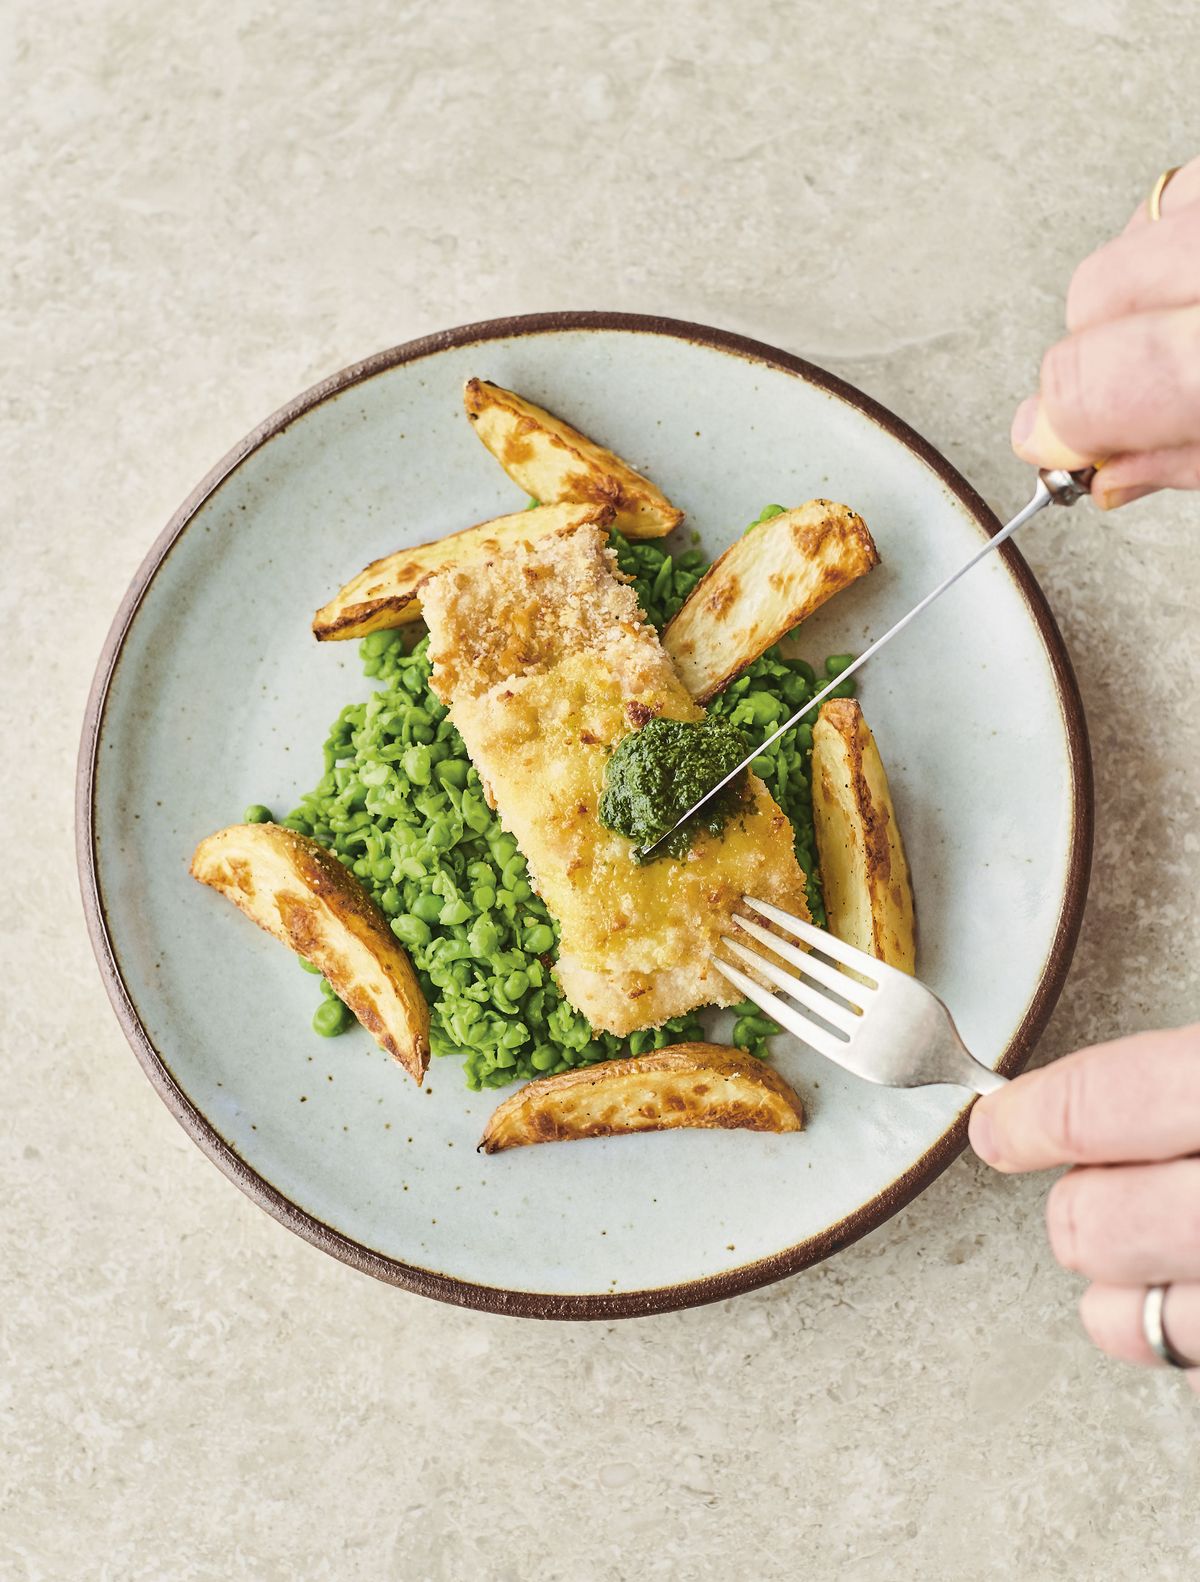 Jamie Oliver’s Cheat’s Fish and Chips with Bacon Crumb, Smashed Peas and Quick Mint Sauce